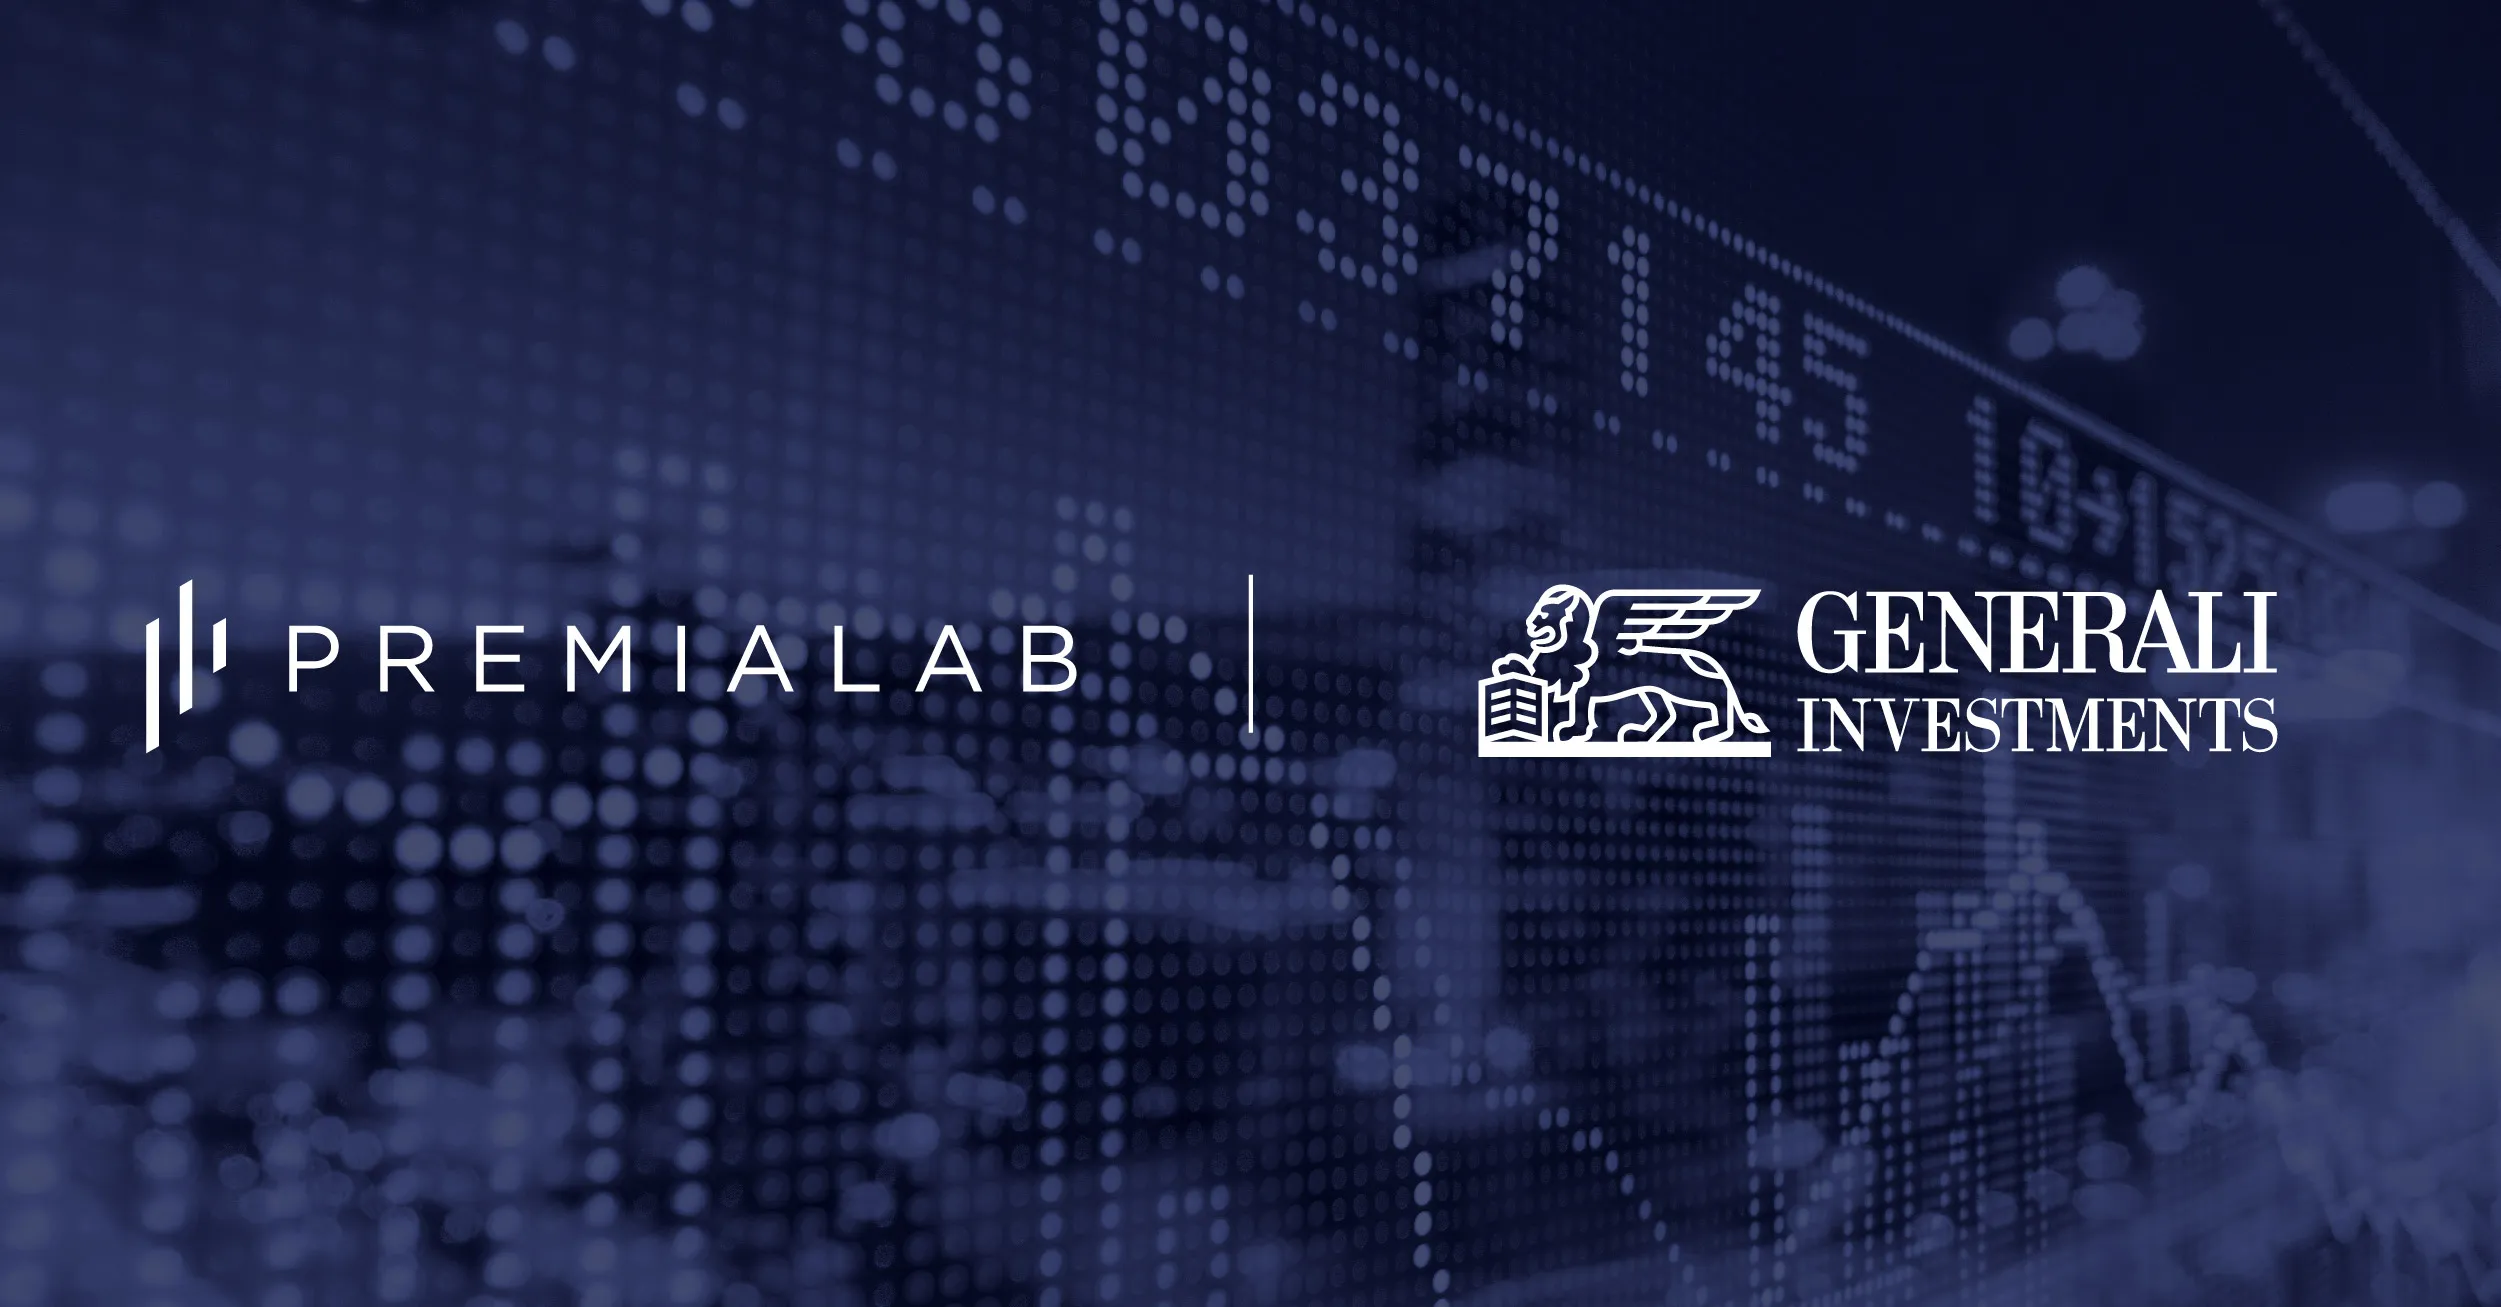 Generali Partners with Premialab for Multi-Asset Investments